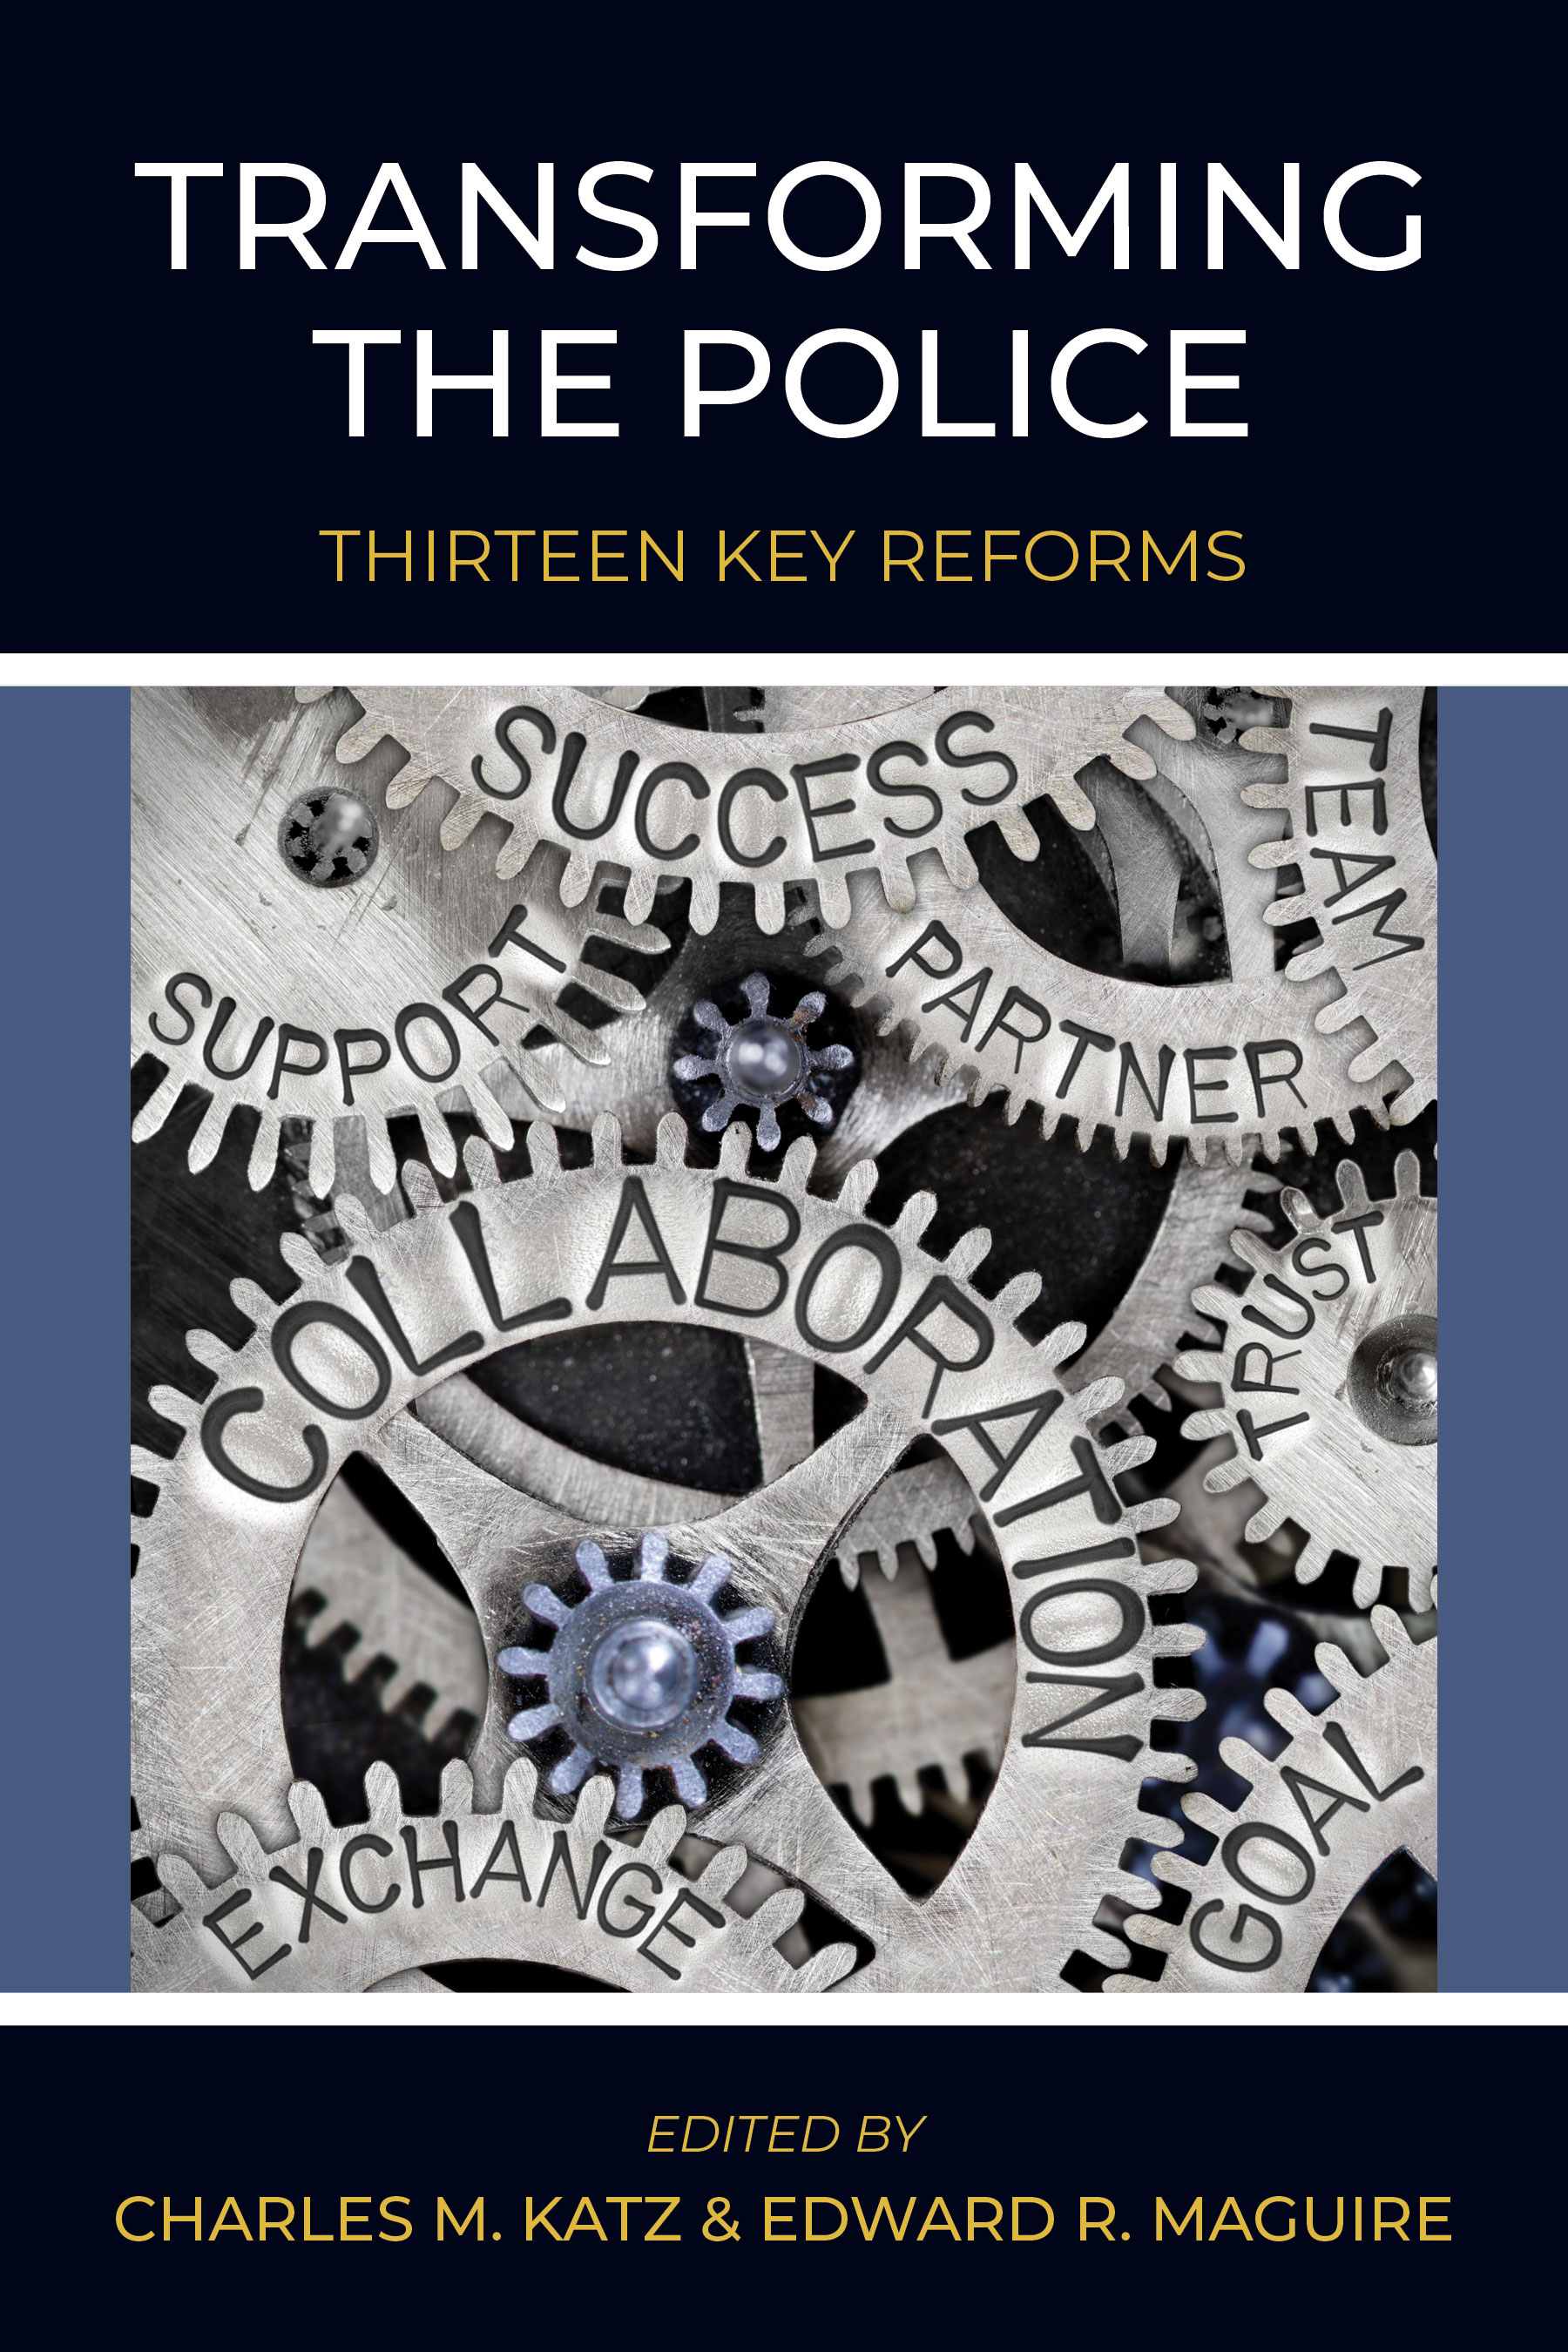 Transforming the Police: Thirteen Key Reforms by Charles M. Katz, Edward R. Maguire